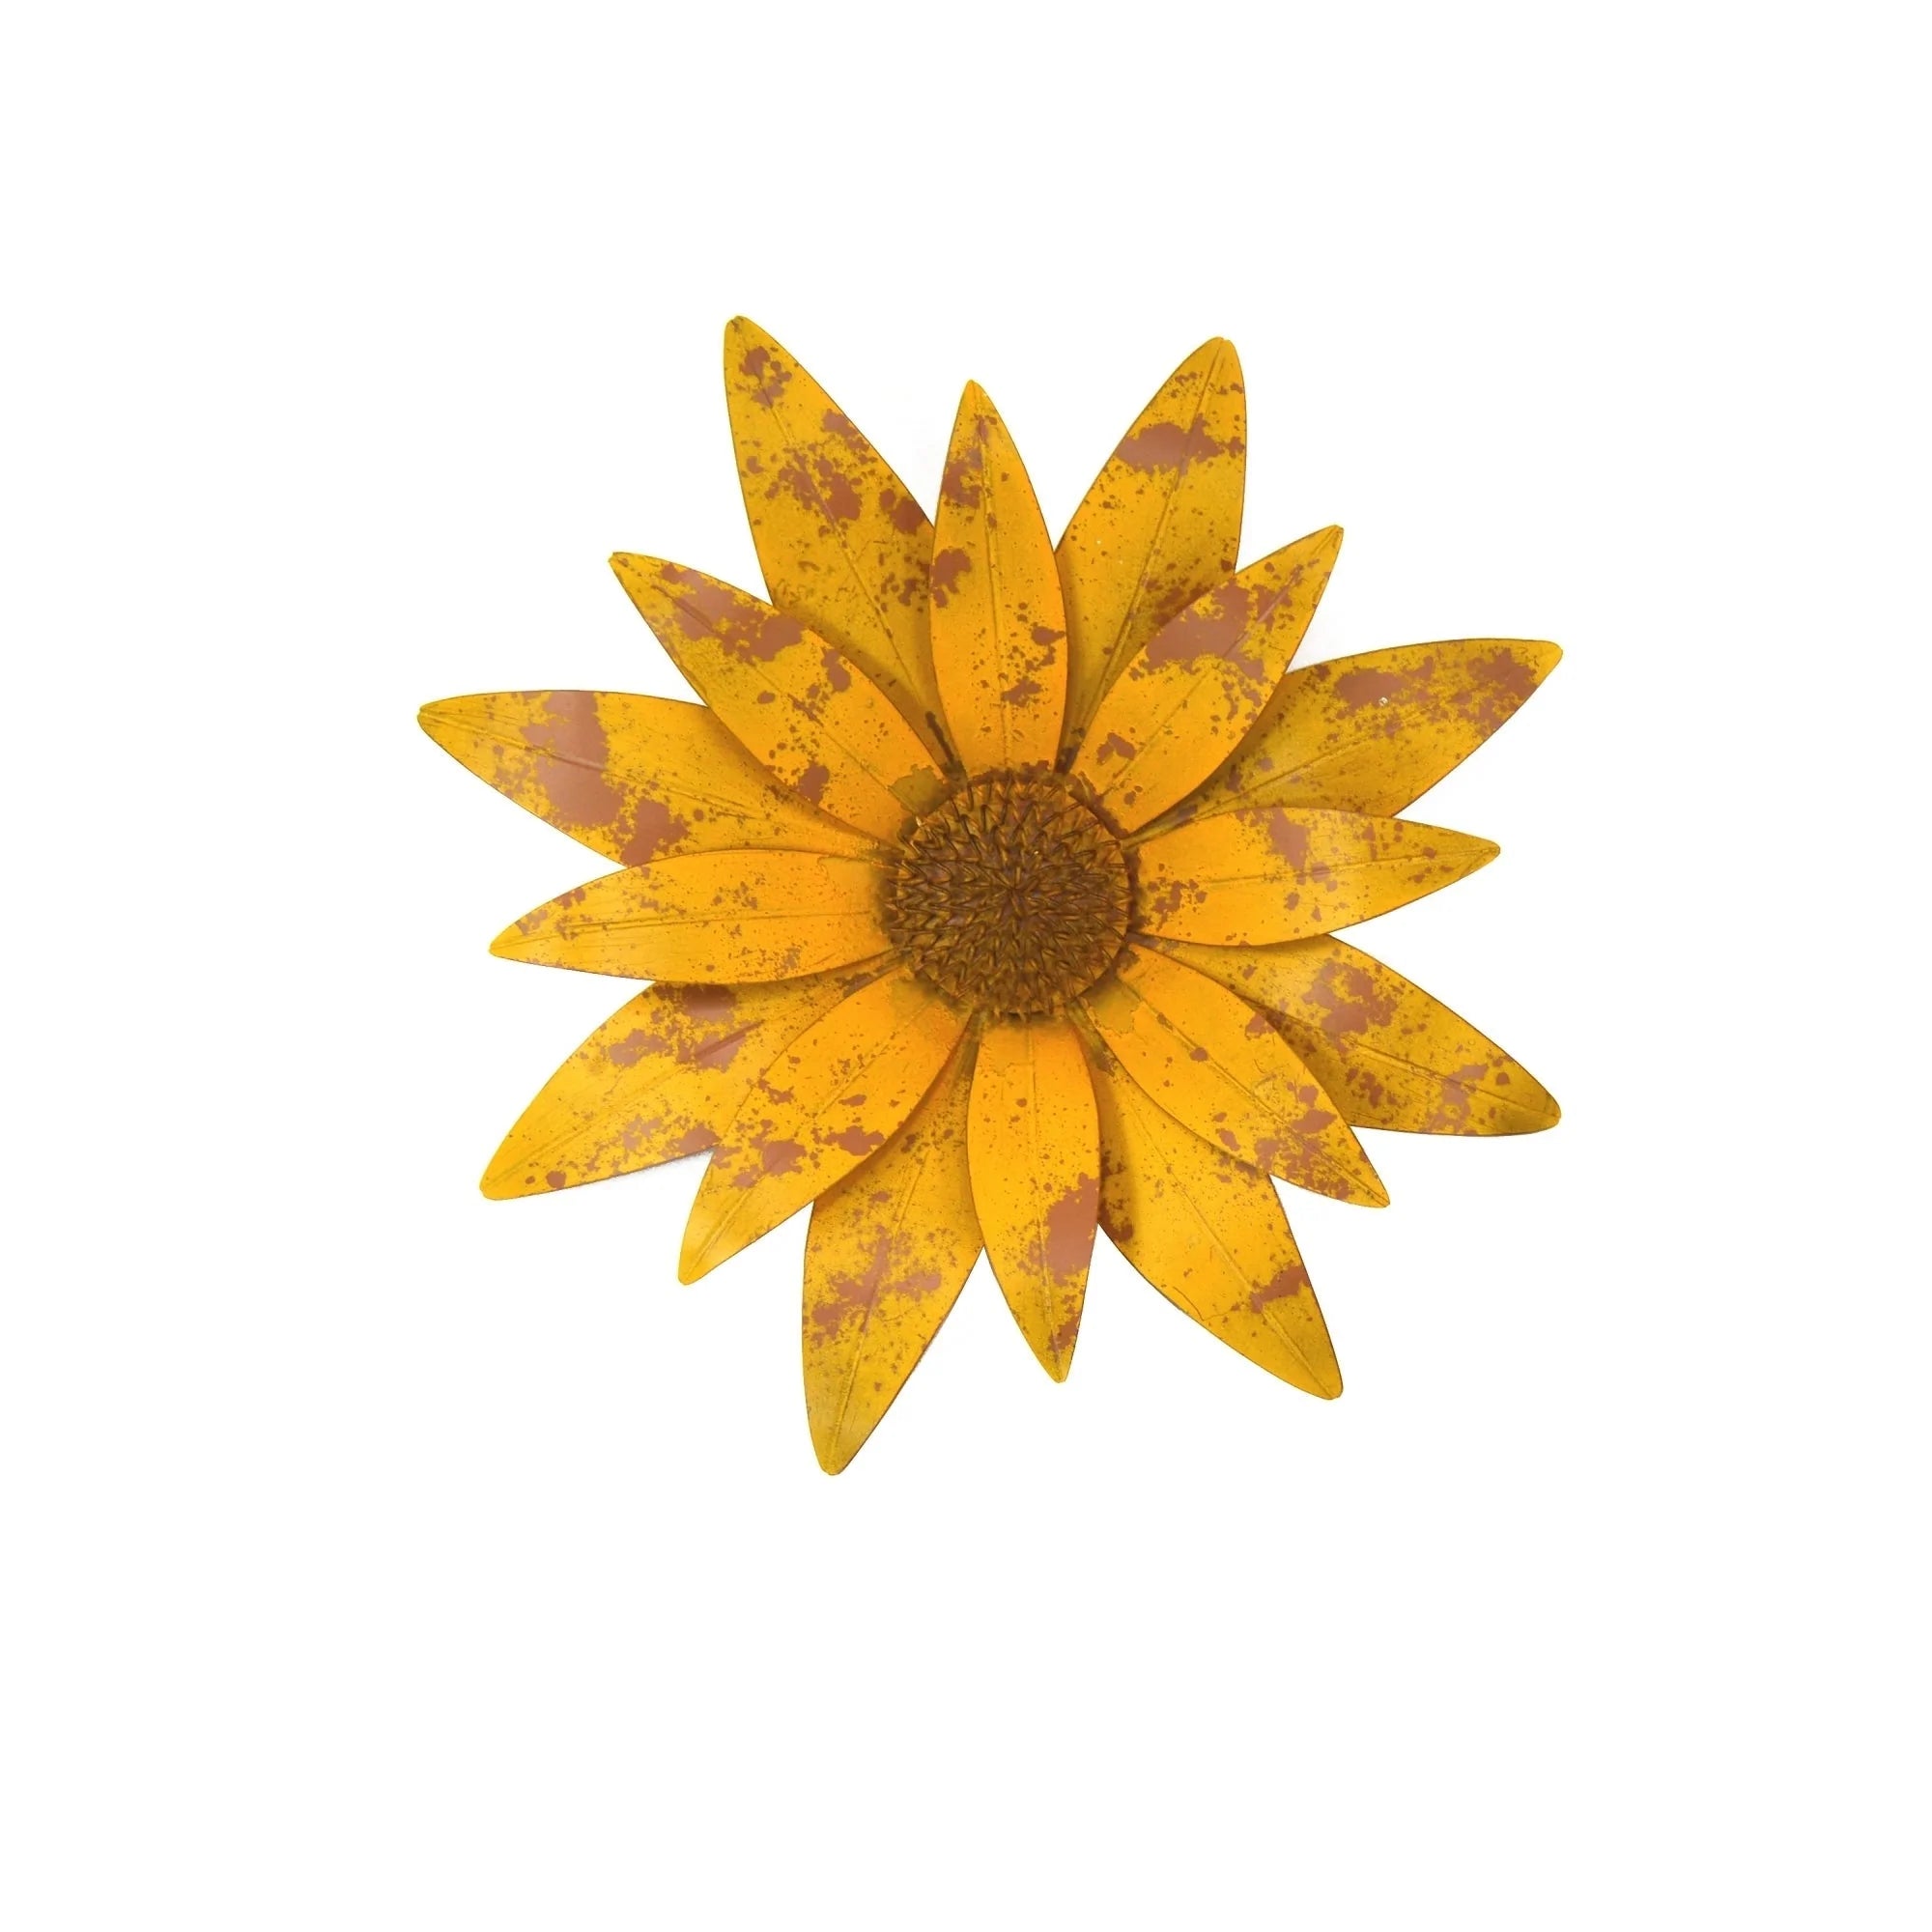 Rustic Chic - Large Sunflower